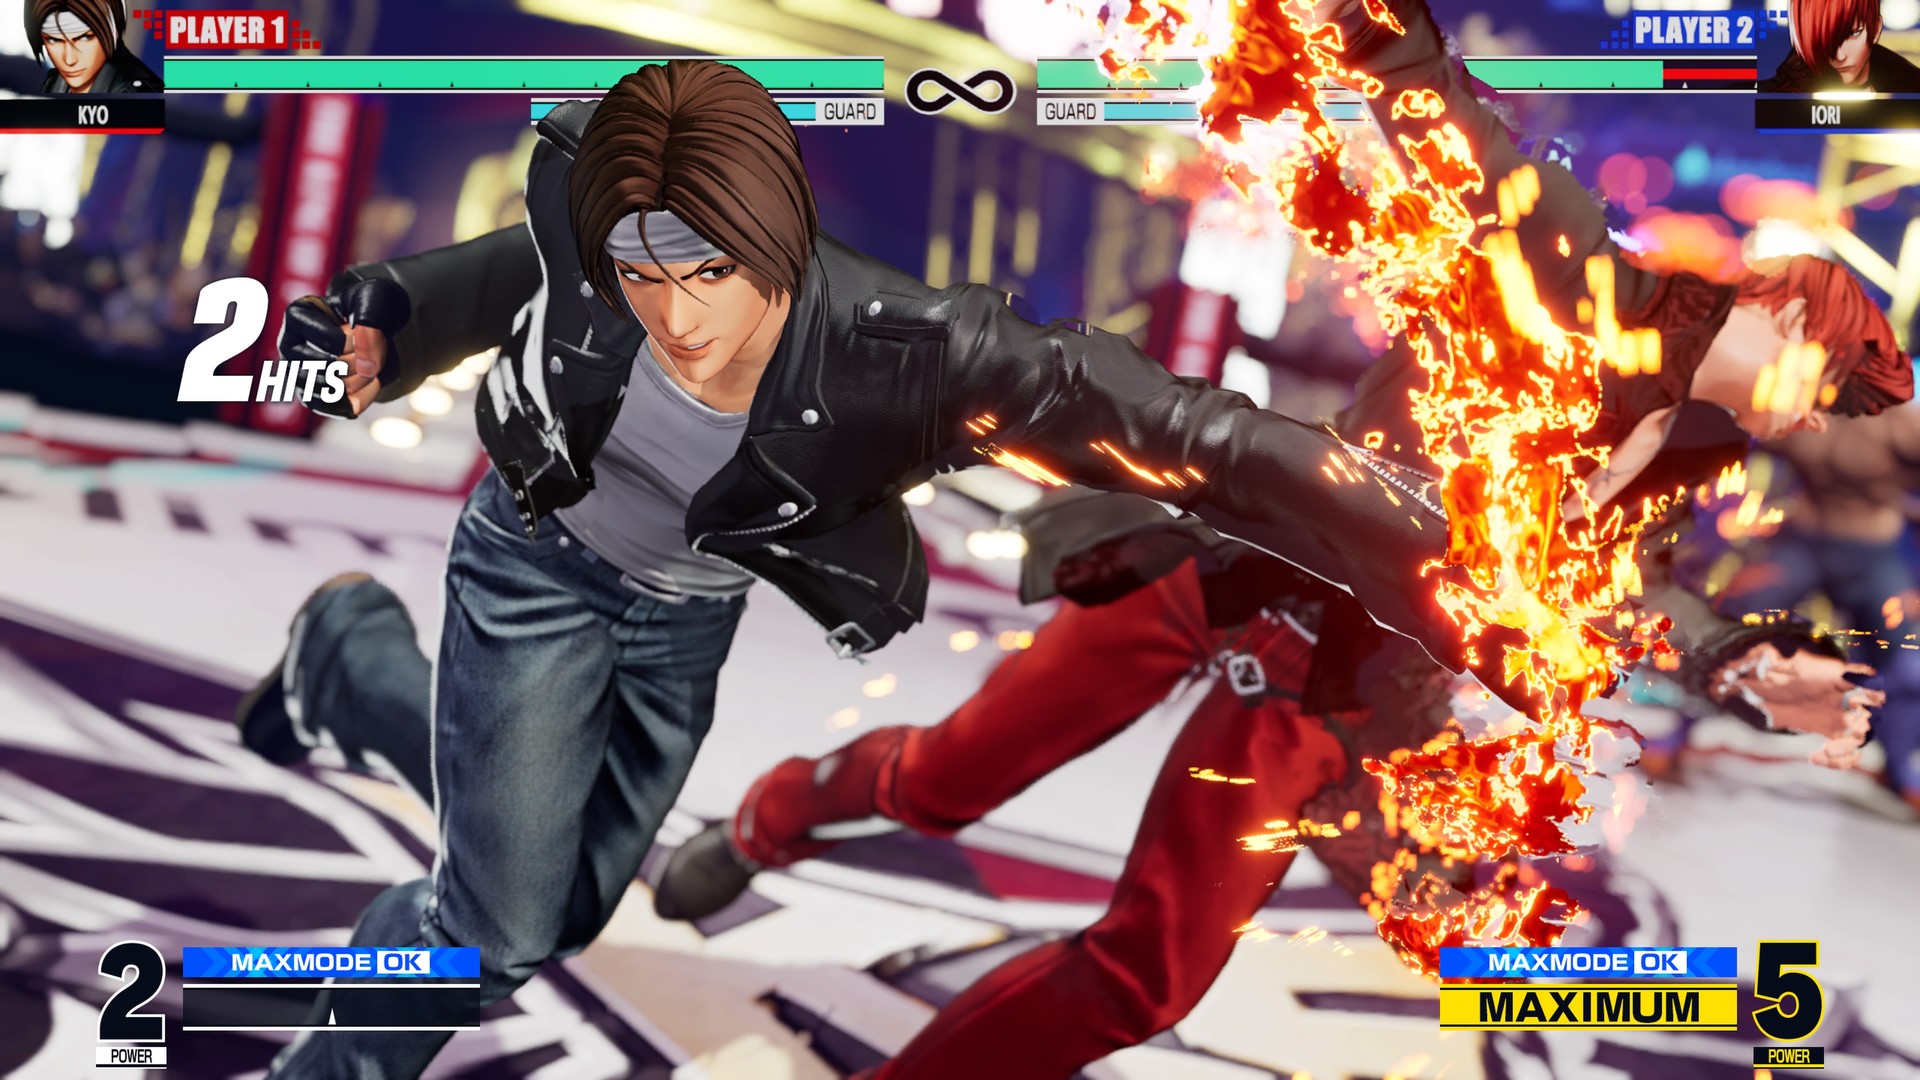 SNK PLAYMORE:KOF Series' 3 Masterpiece Titles Available on STEAM at a Very  Advantageous Price!